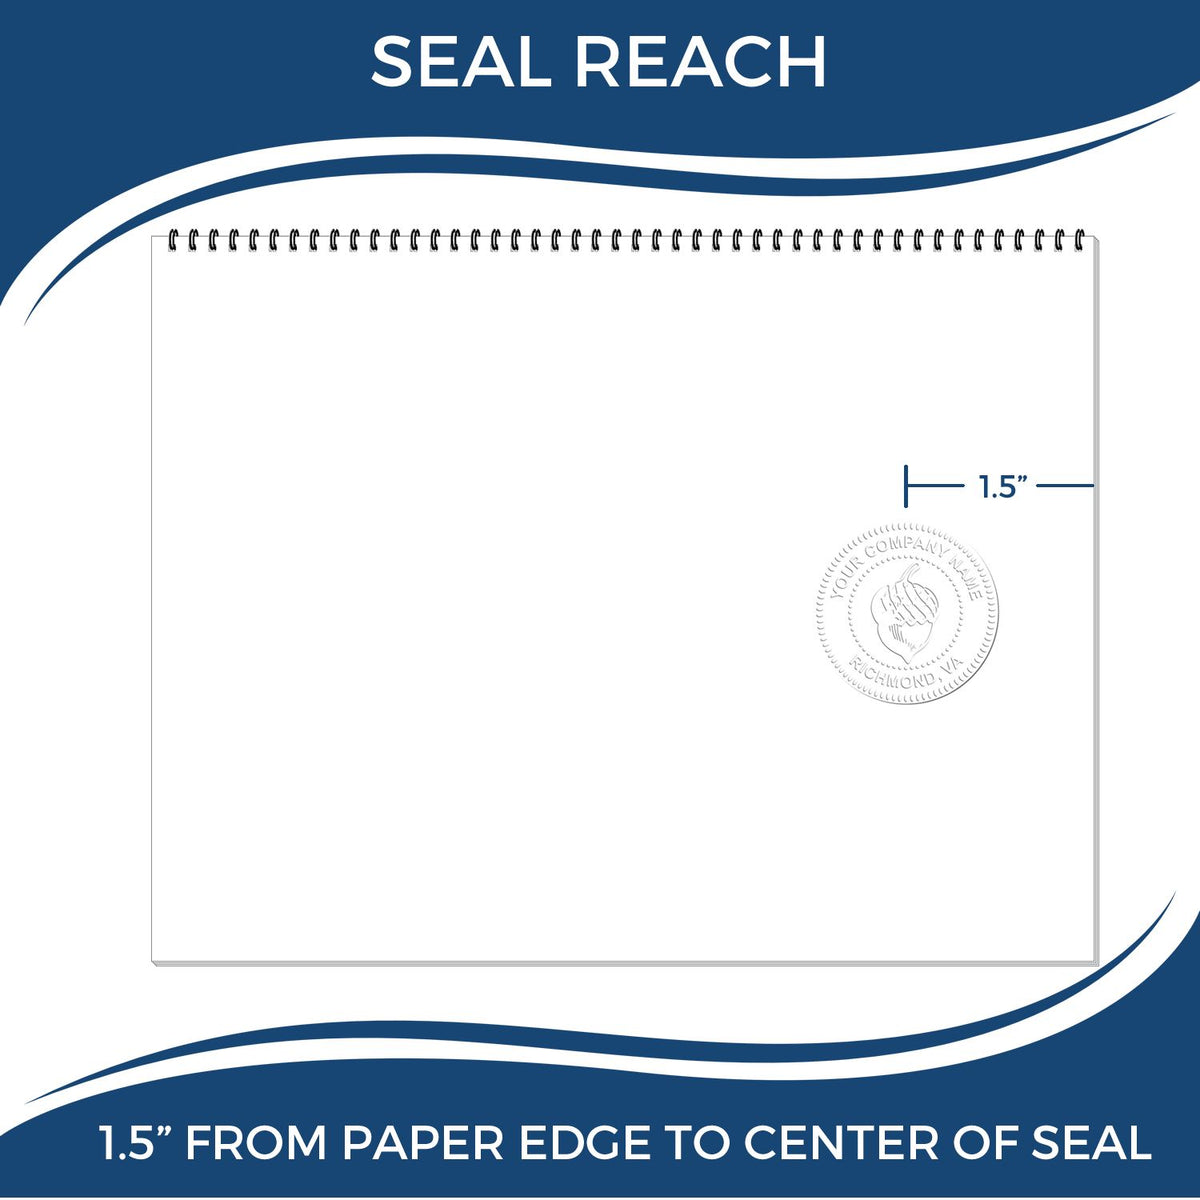 An infographic showing the seal reach which is represented by a ruler and a miniature seal image of the Hybrid Texas Engineer Seal